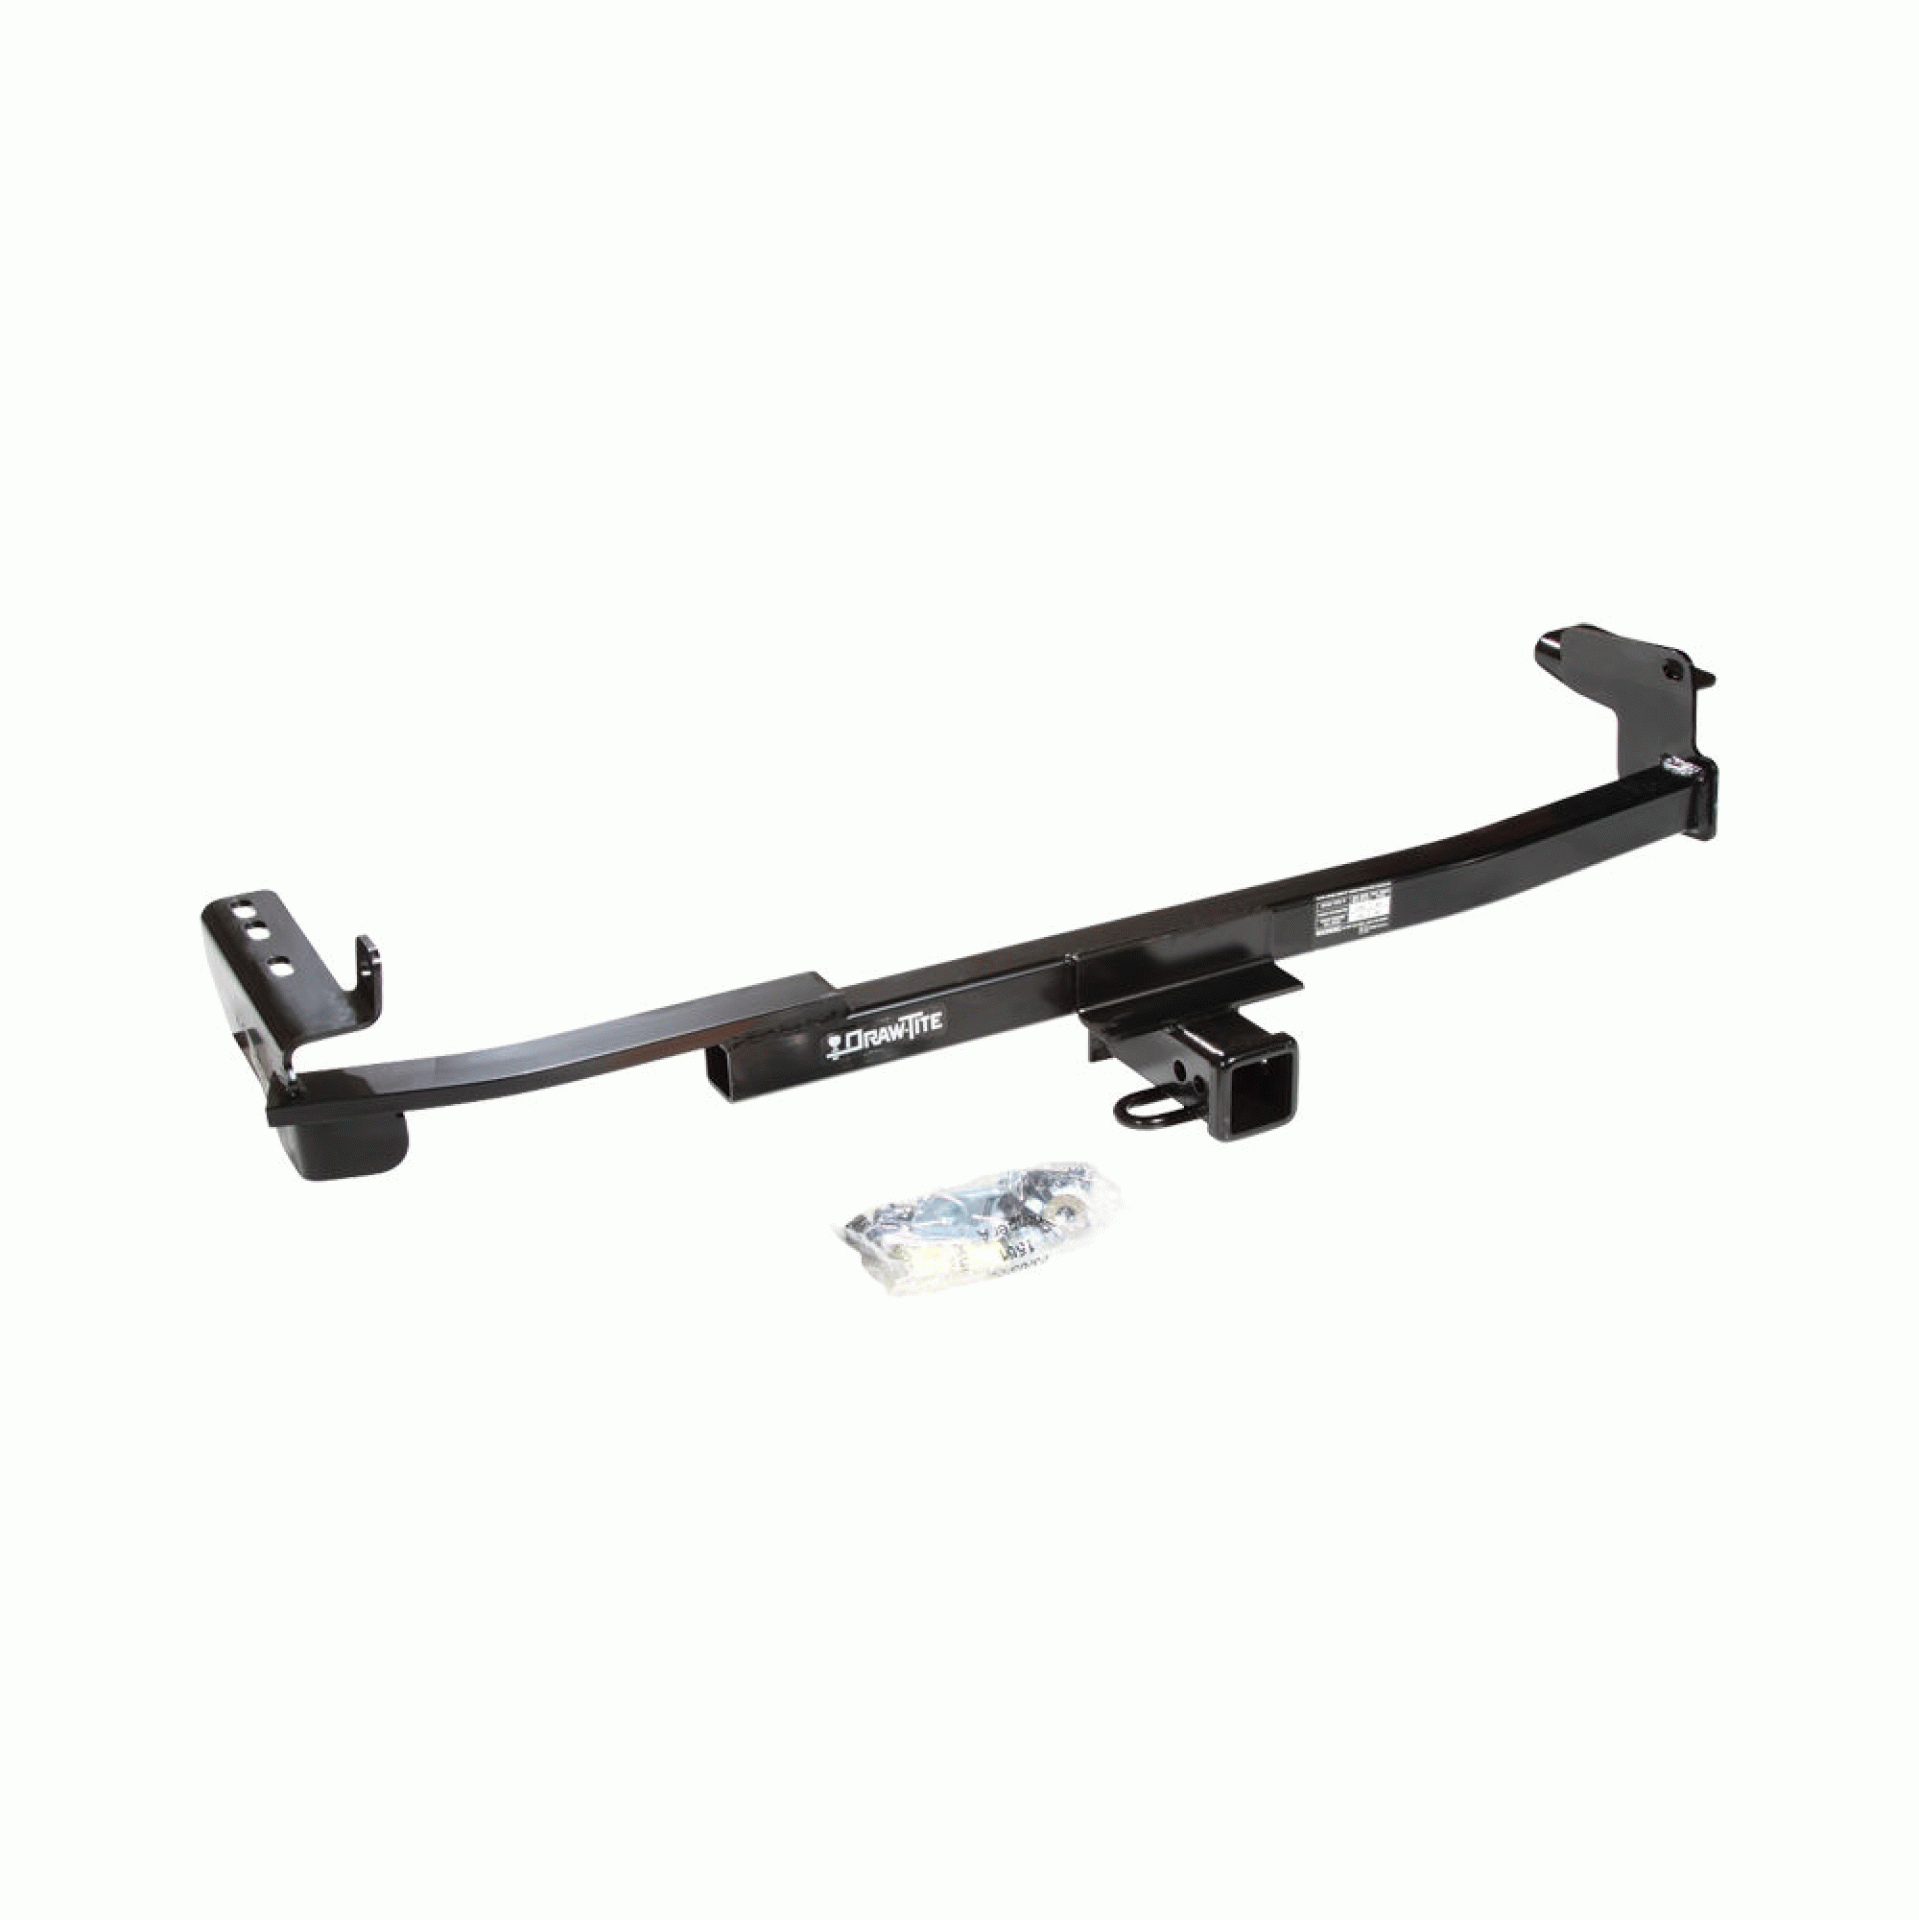 DRAW-TITE | 75299 | HITCH CLASS III REQUIRES 2 INCH REMOVABLE DRAWBAR